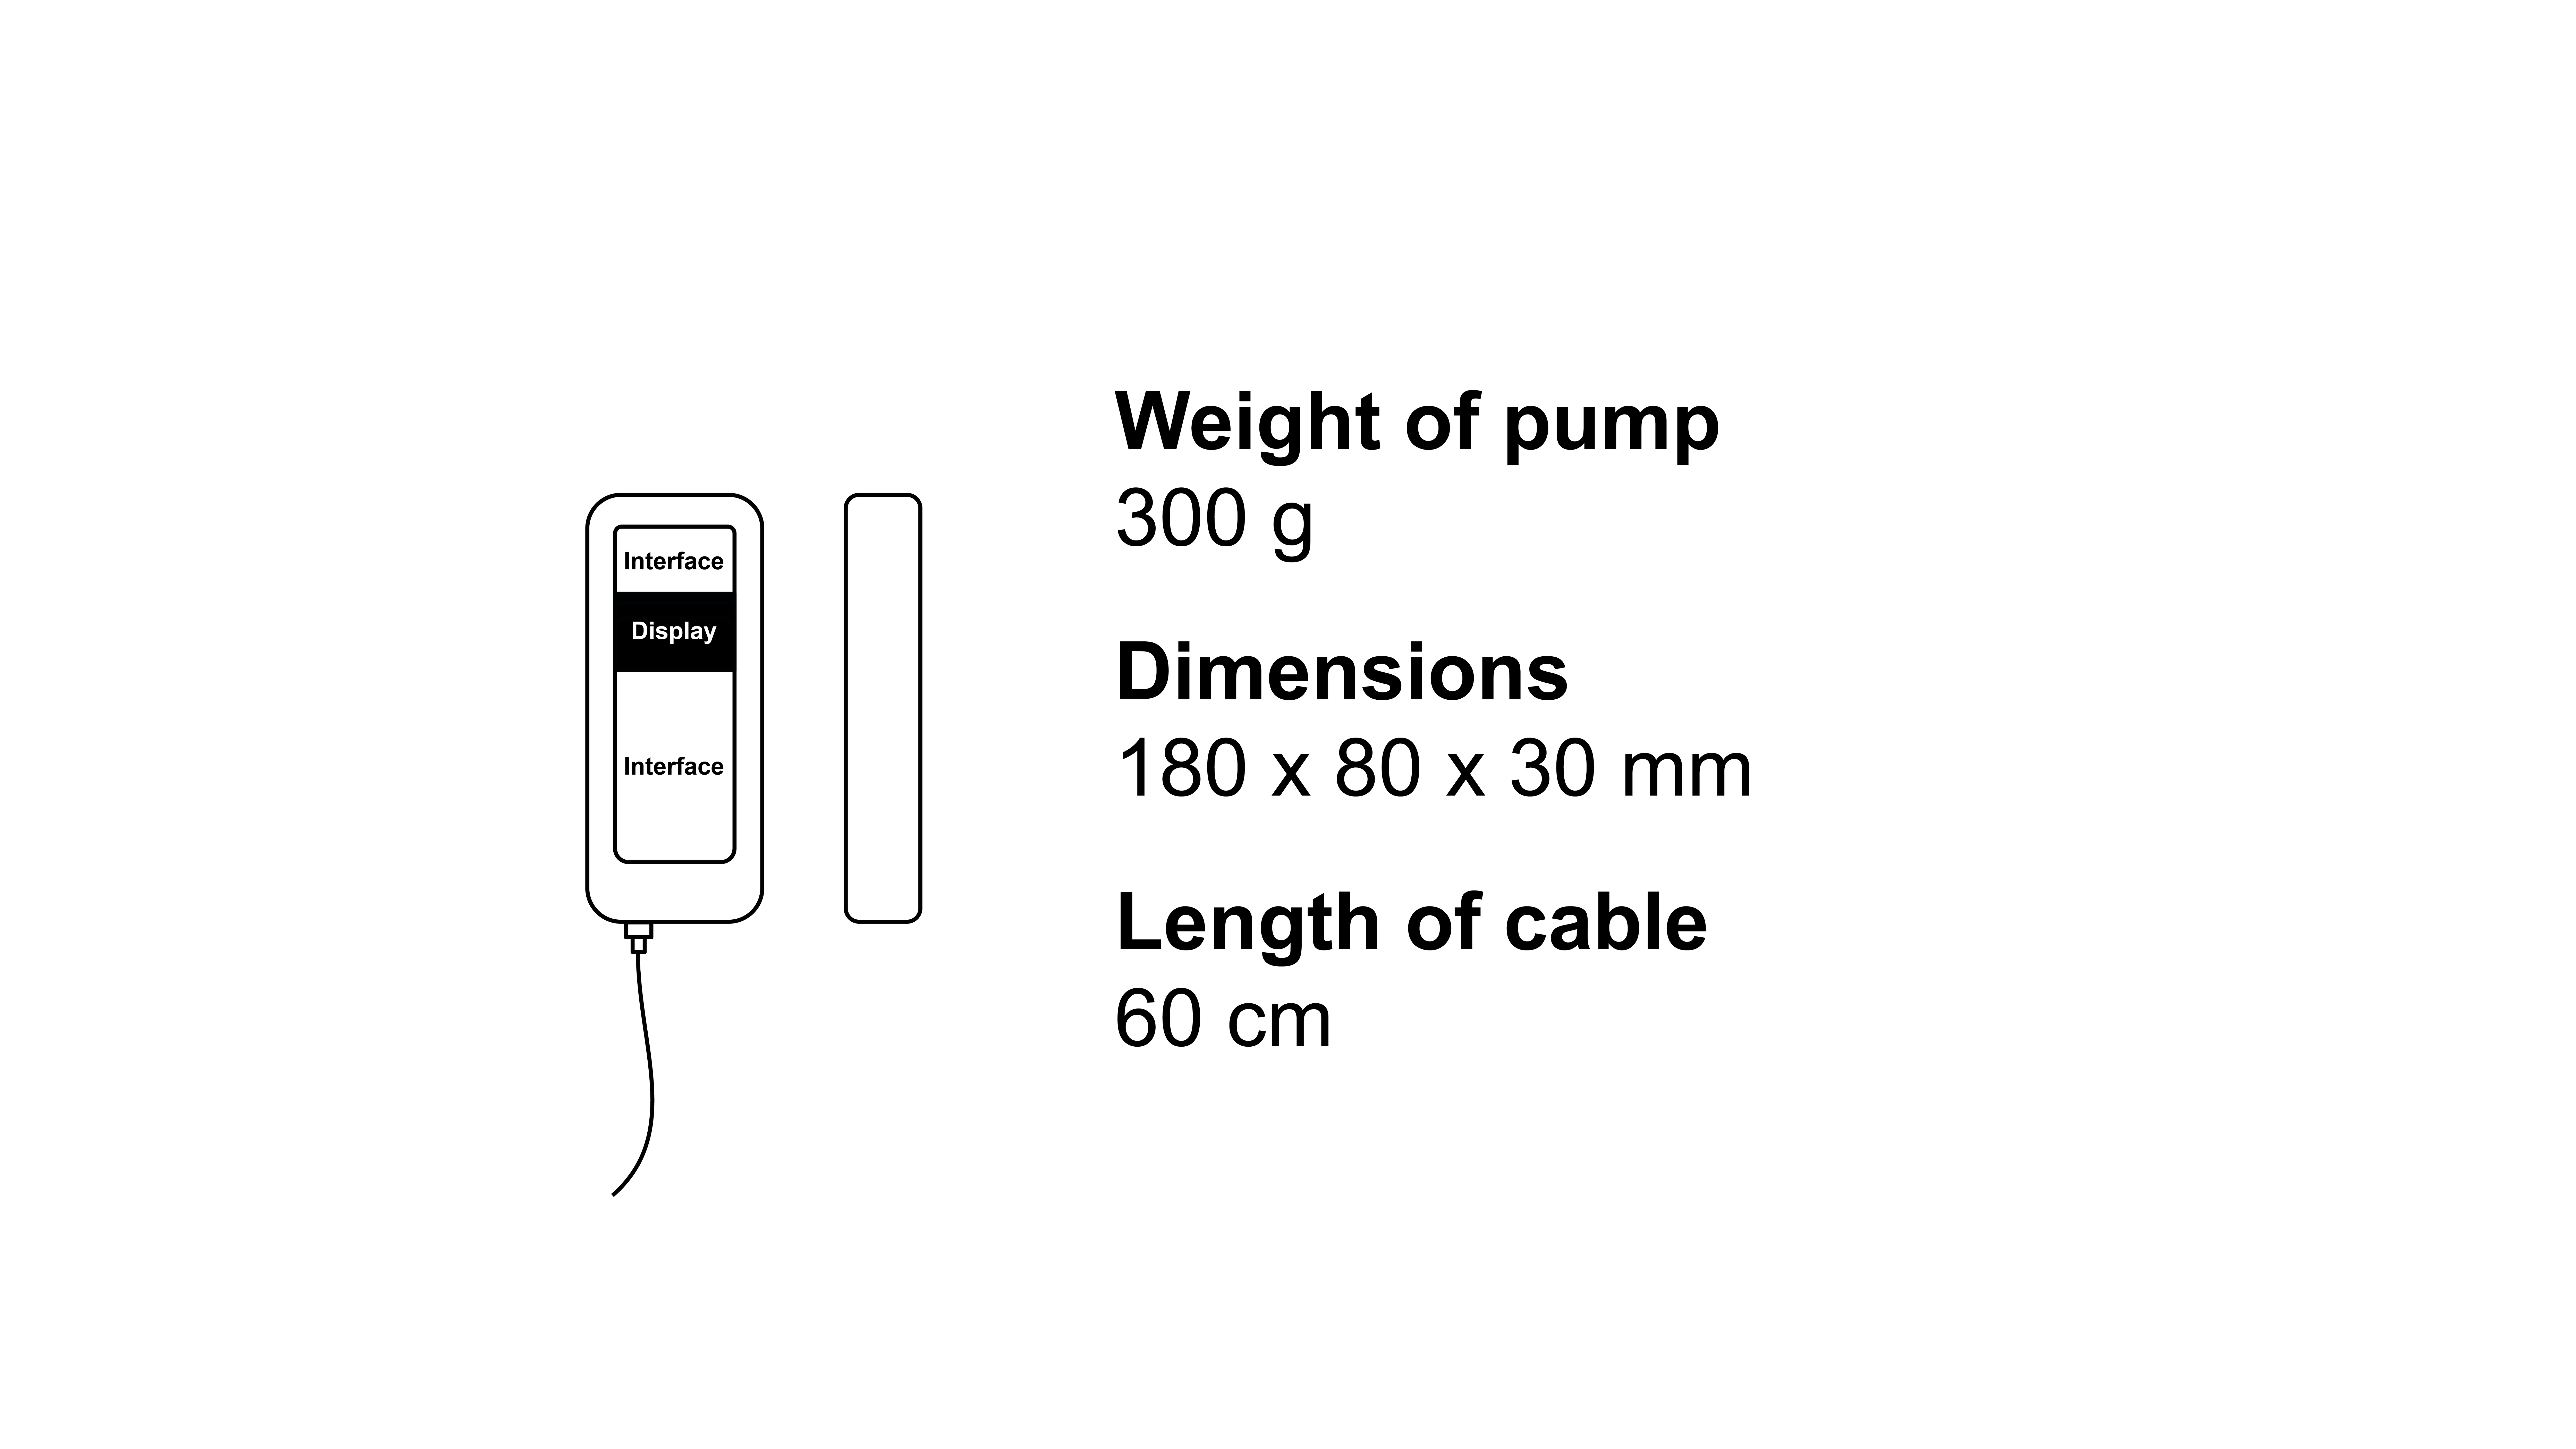 Figure 1 - When designing the wearing aid, take the dimensioning of the pump into account